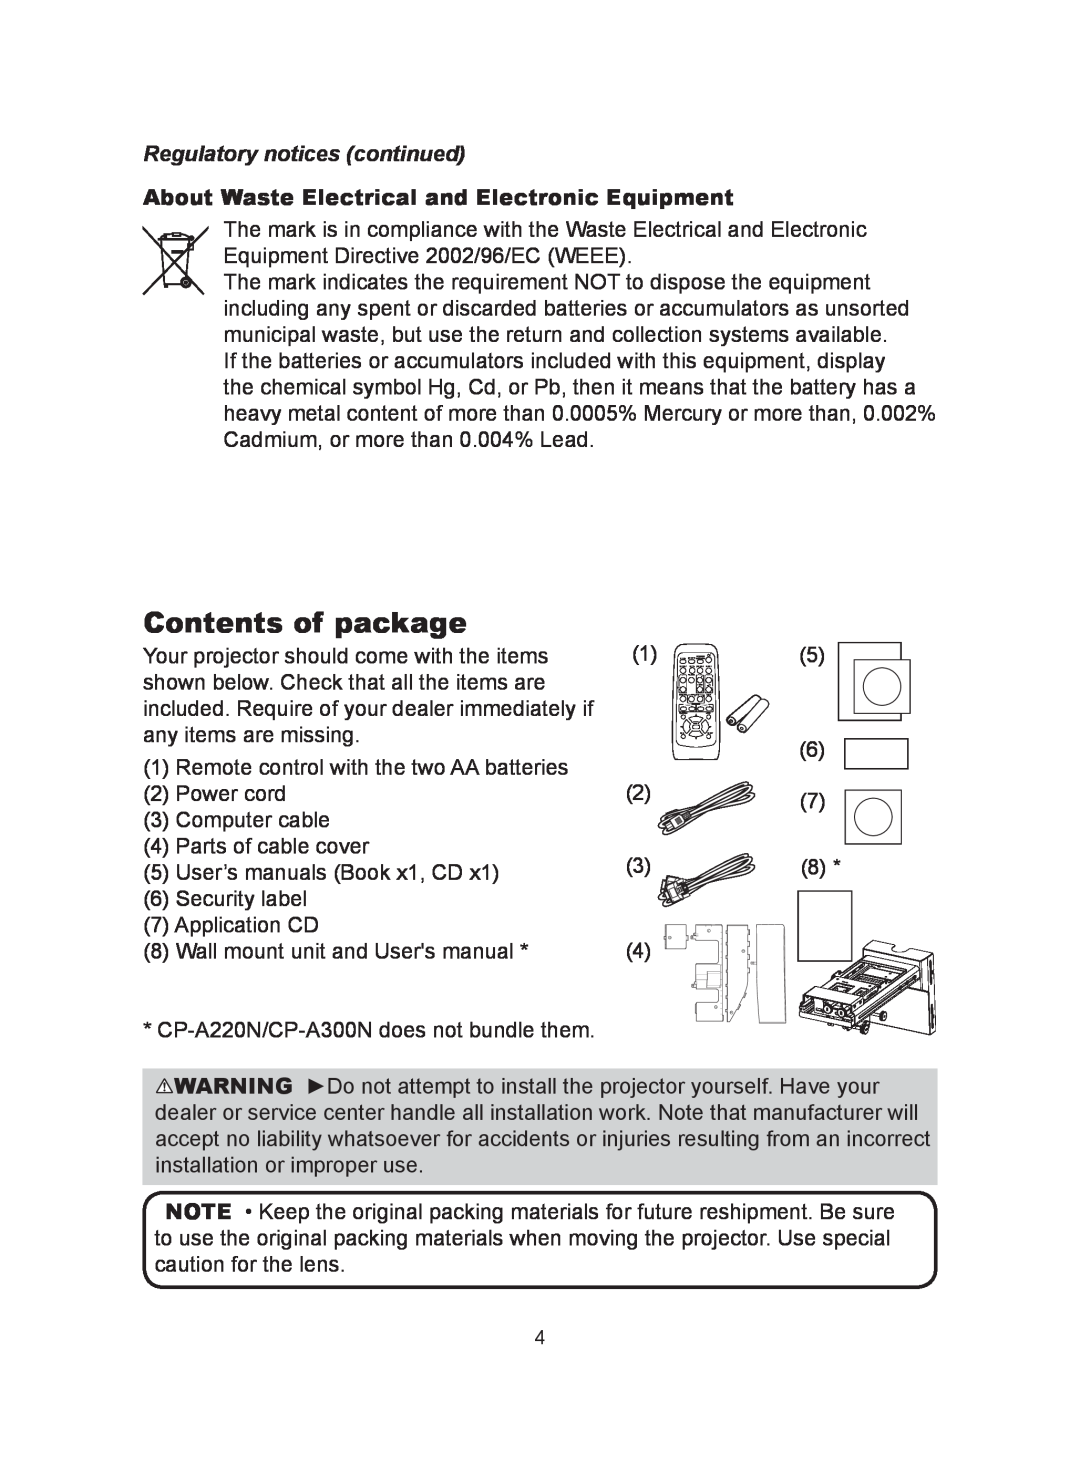 Hitachi CP-A300N Contents of package, Regulatory notices continued, About Waste Electrical and Electronic Equipment 